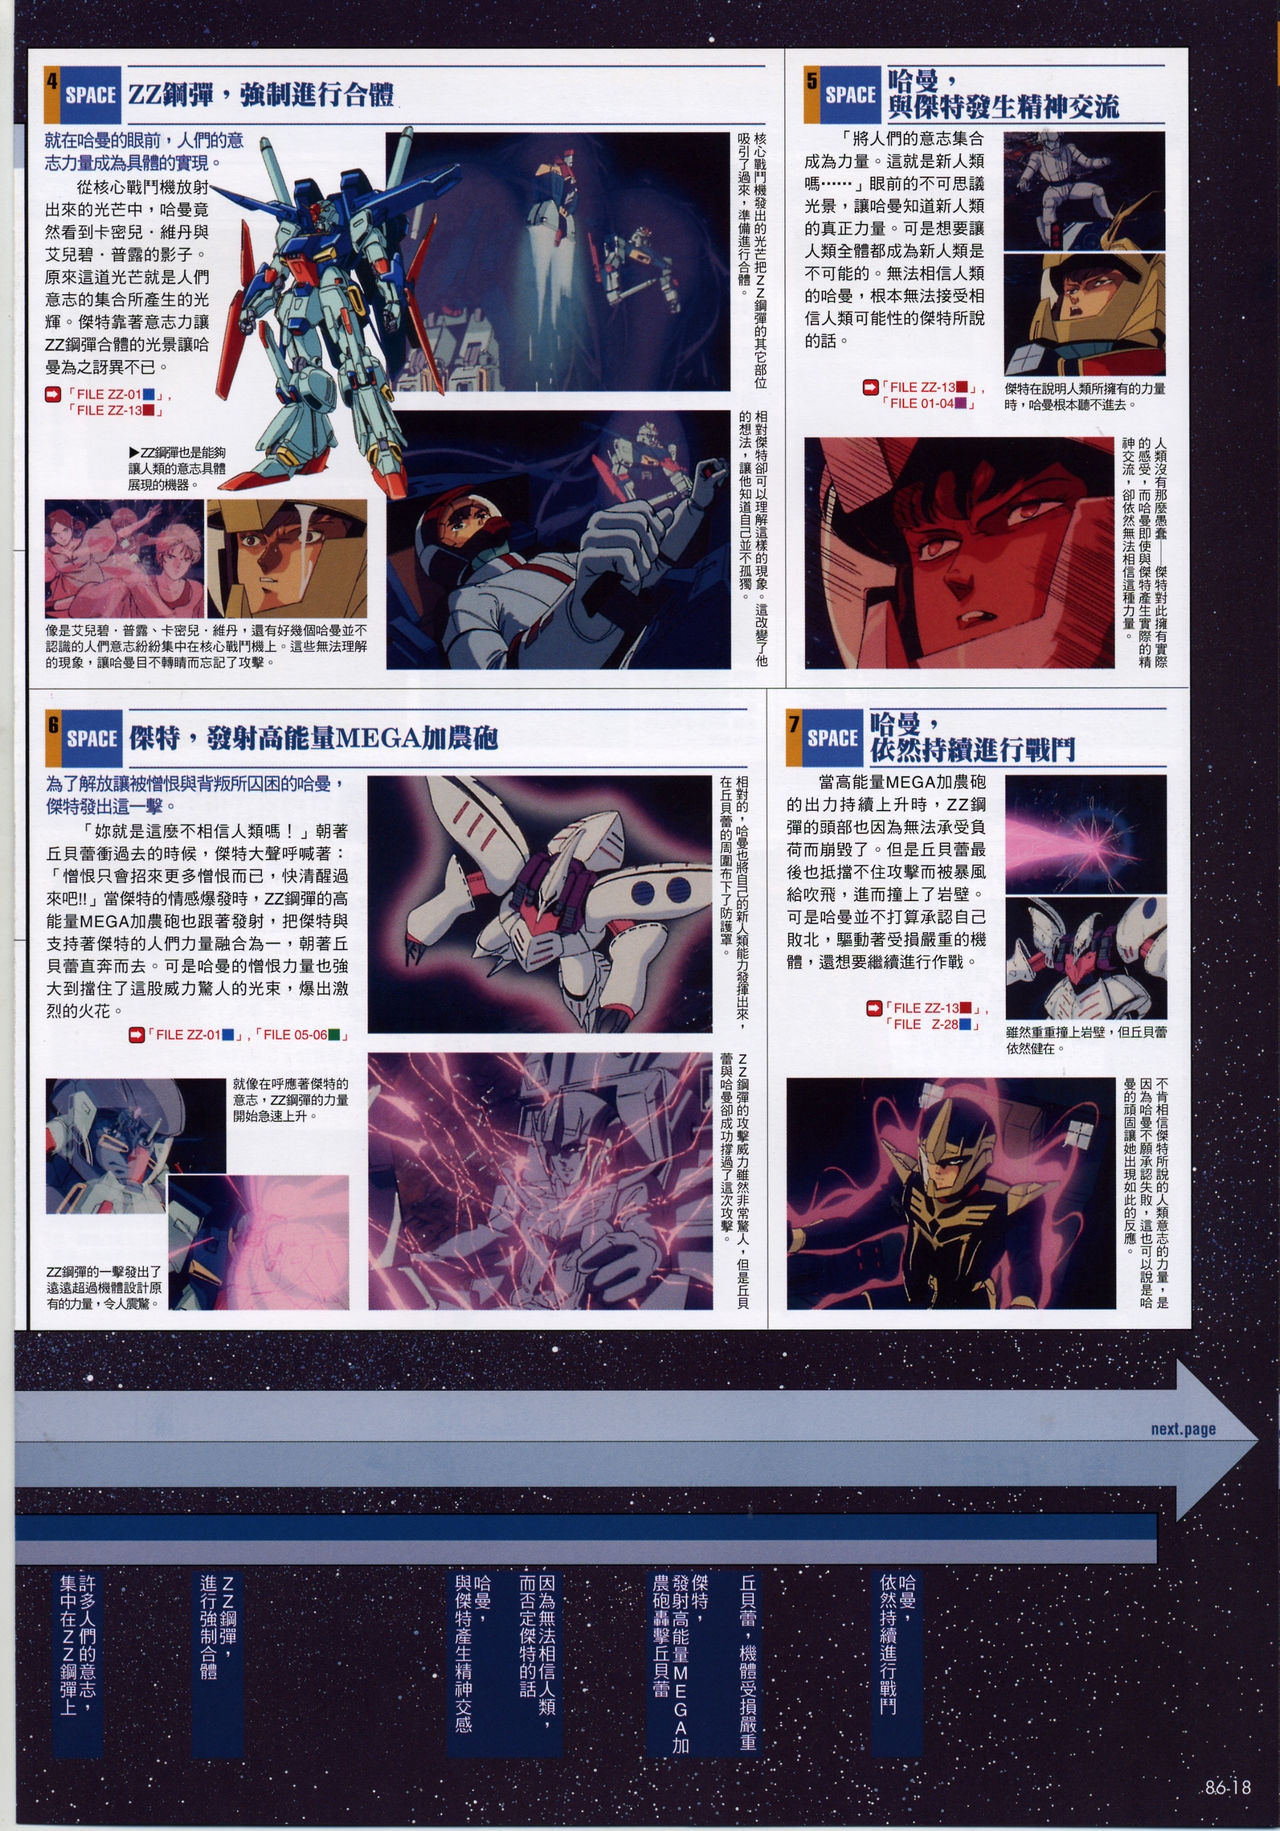 The Official Gundam Fact File - 086 [Chinese] 19